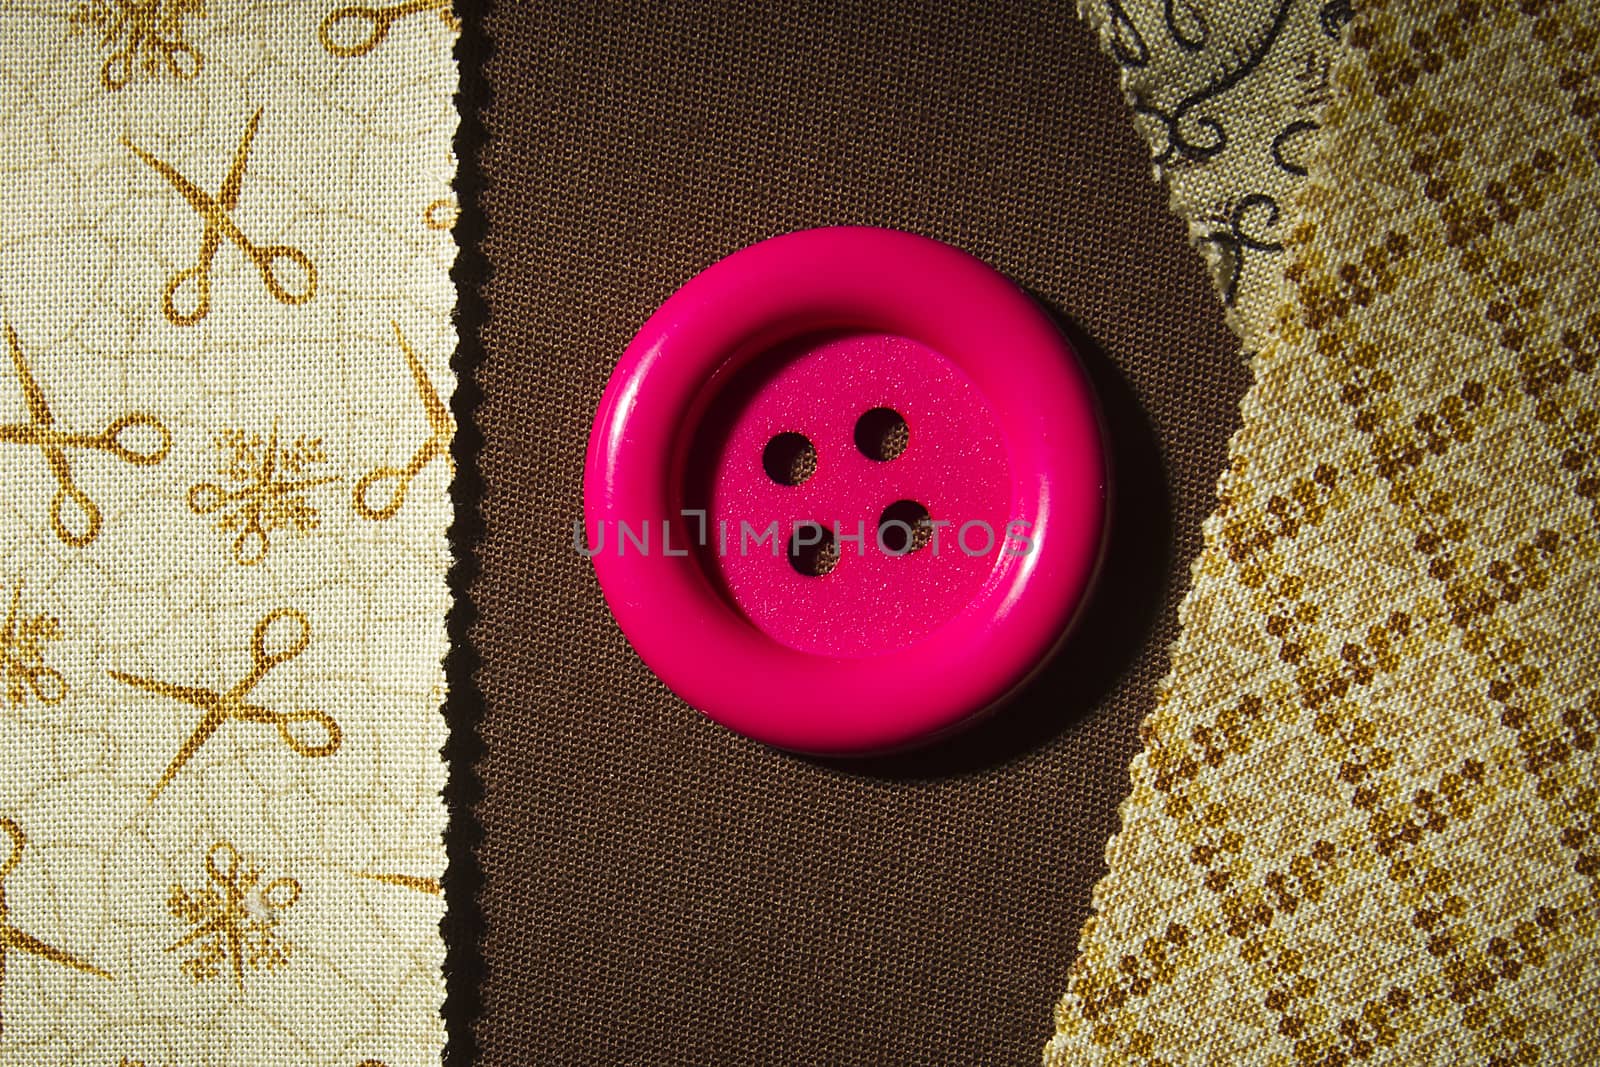 Button and fragments of fabric on a wooden table